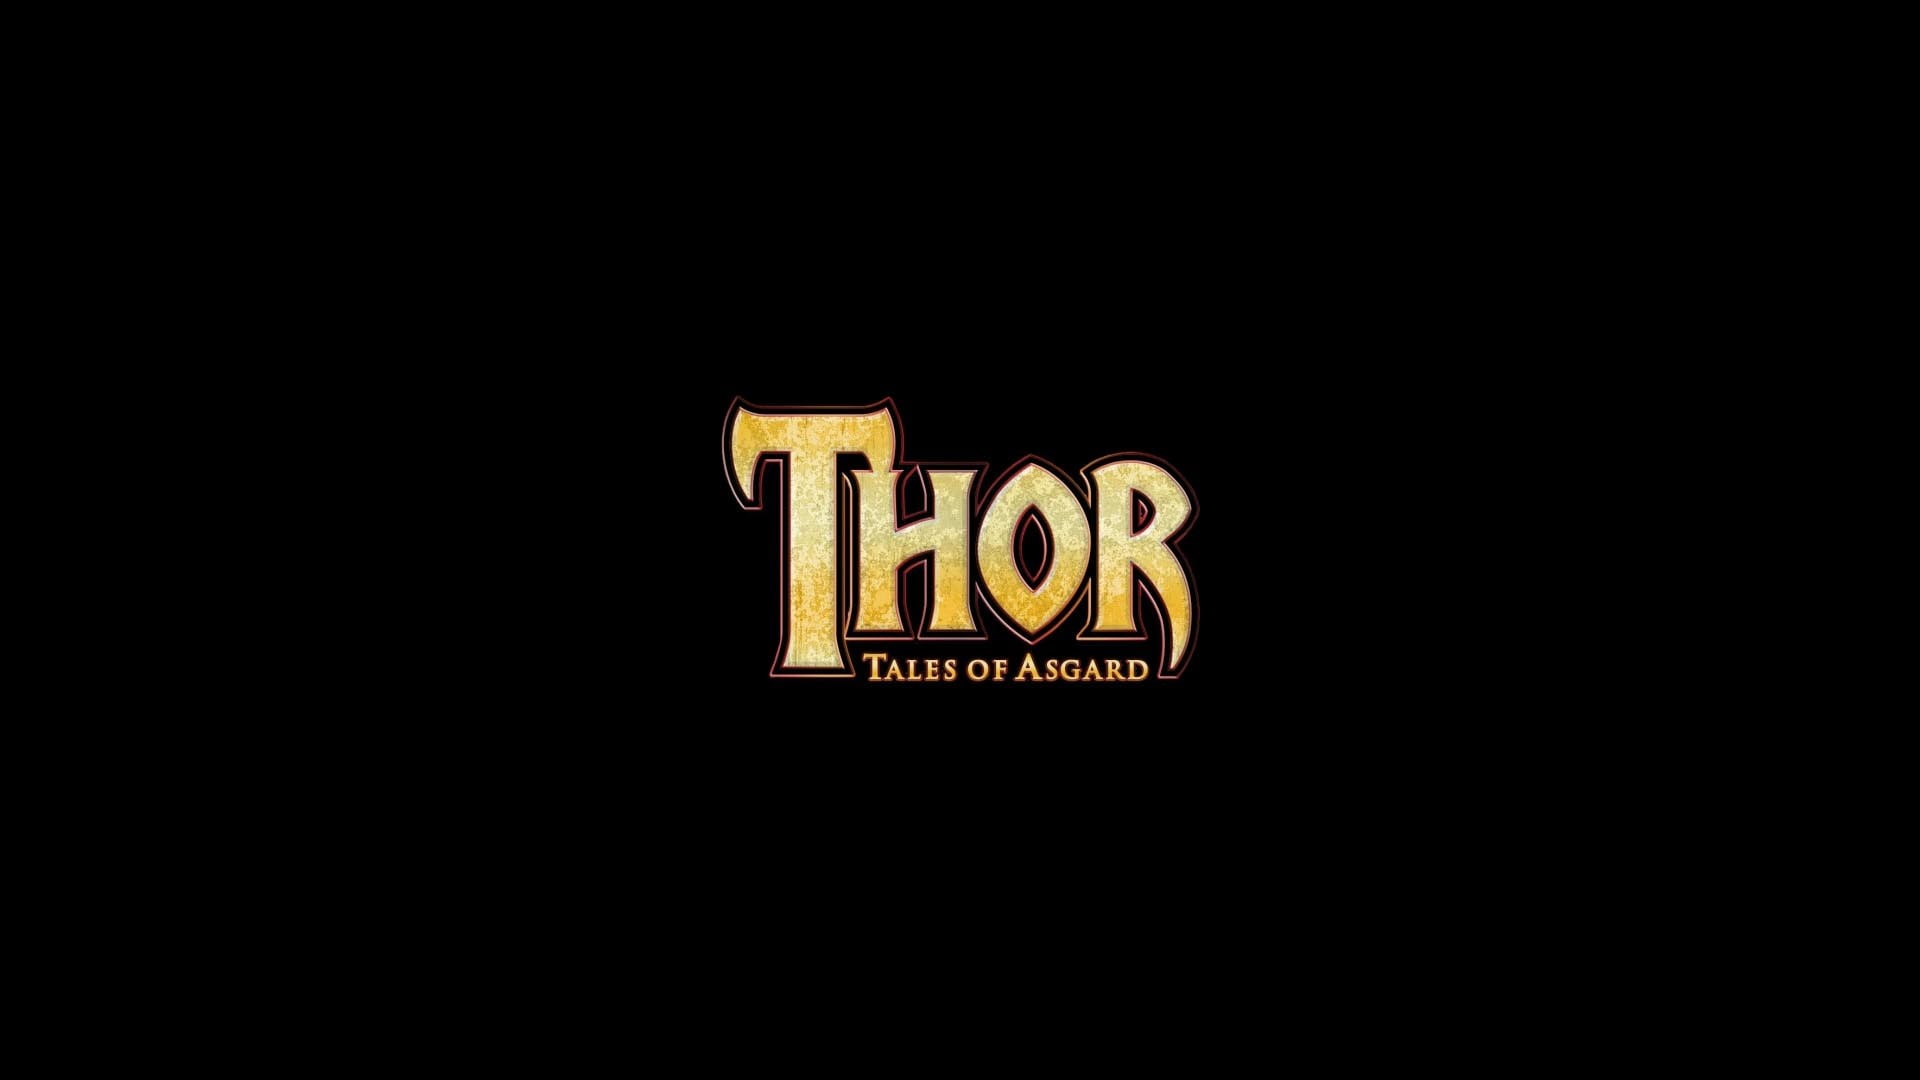 thor tales of asgard, communication, text, western script, copy space